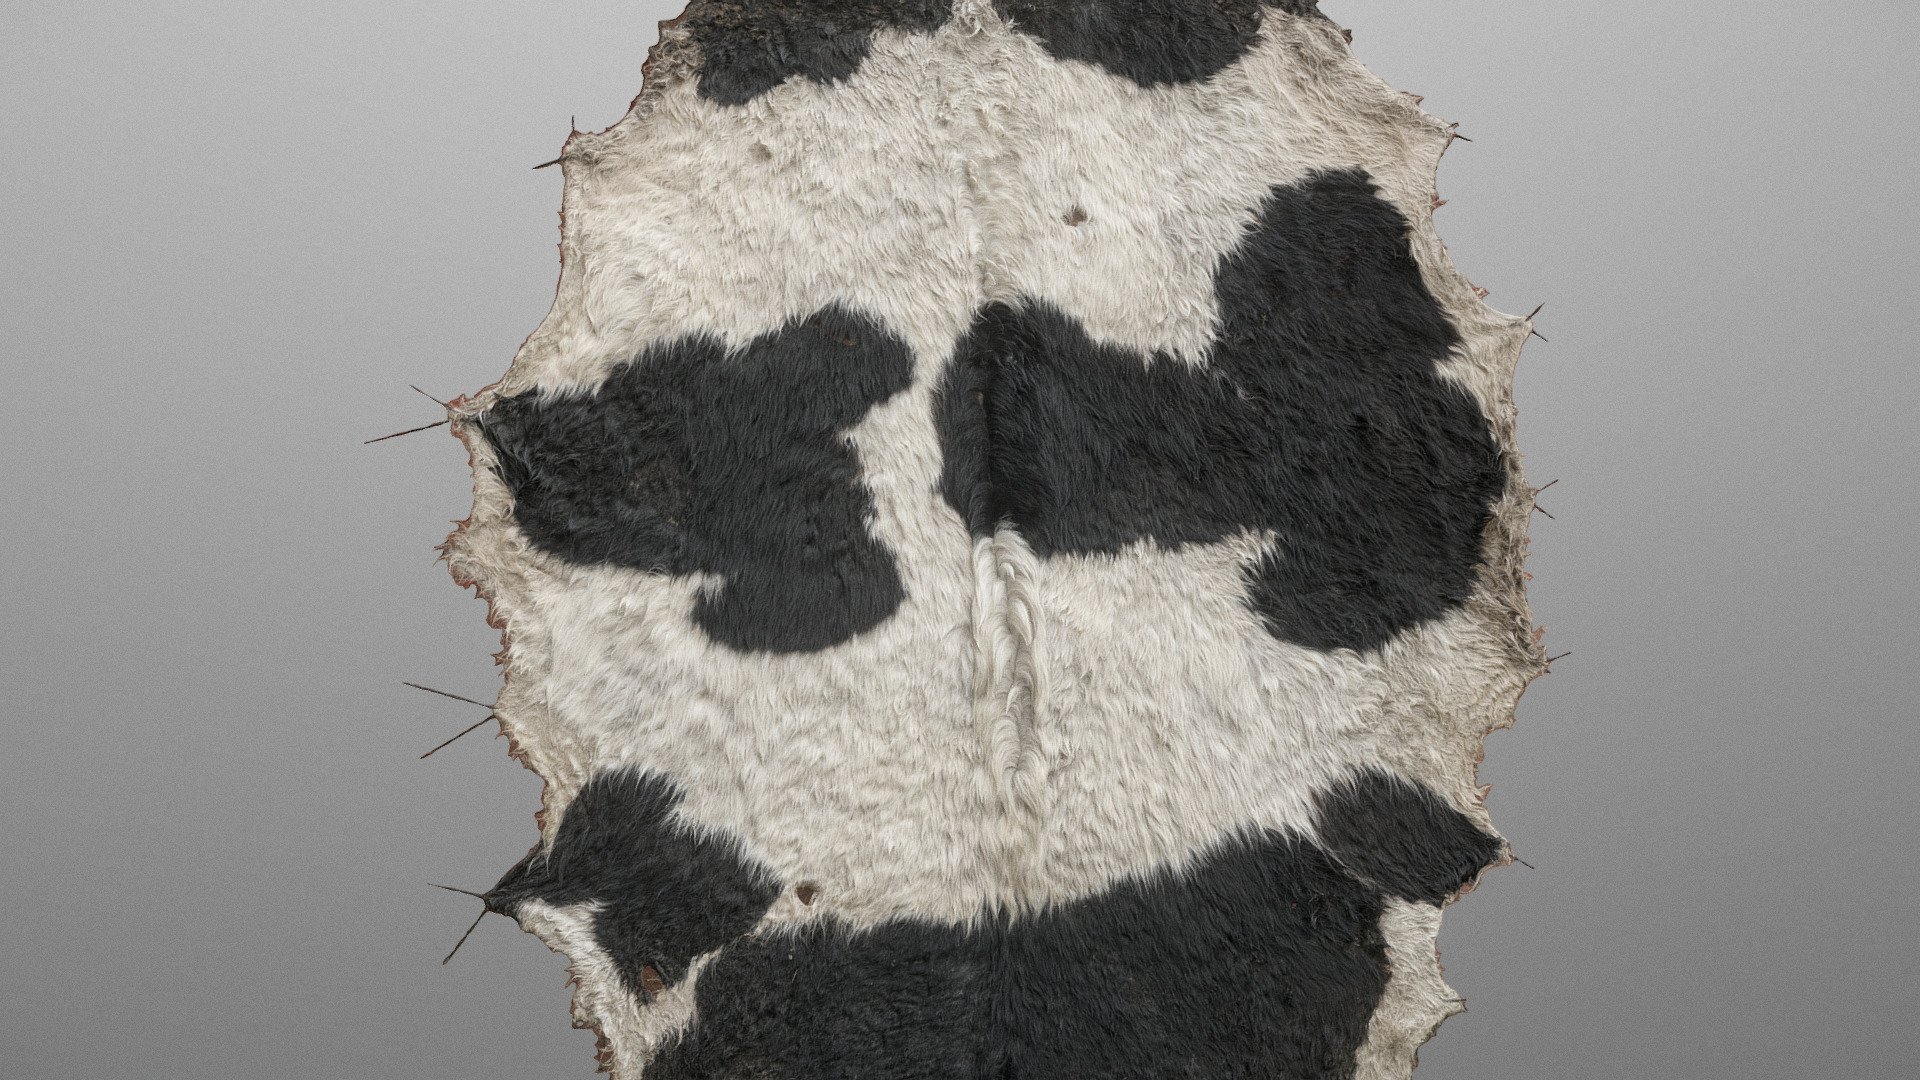 Cowhide cow hide, natural dryed raw cow's animal skin with fur on rope twine hanger

Photogrammetry scan 120x36MP, 2x8K textures - Cowhide - 3D model by matousekfoto 3d model